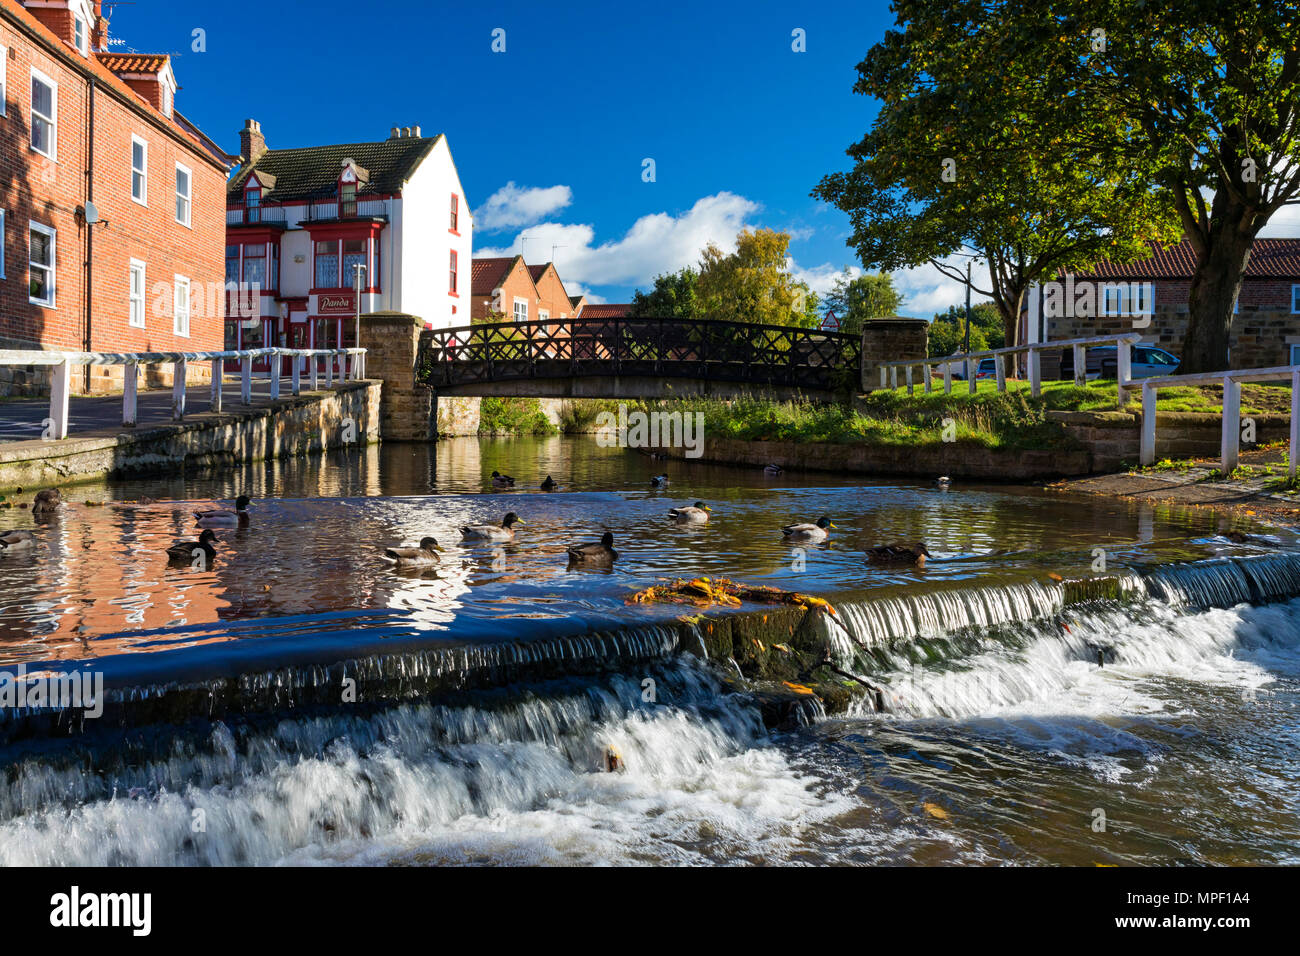 Ducks on weir on River Leven at Stokesley, North Yorkshire, UK Stock Photo